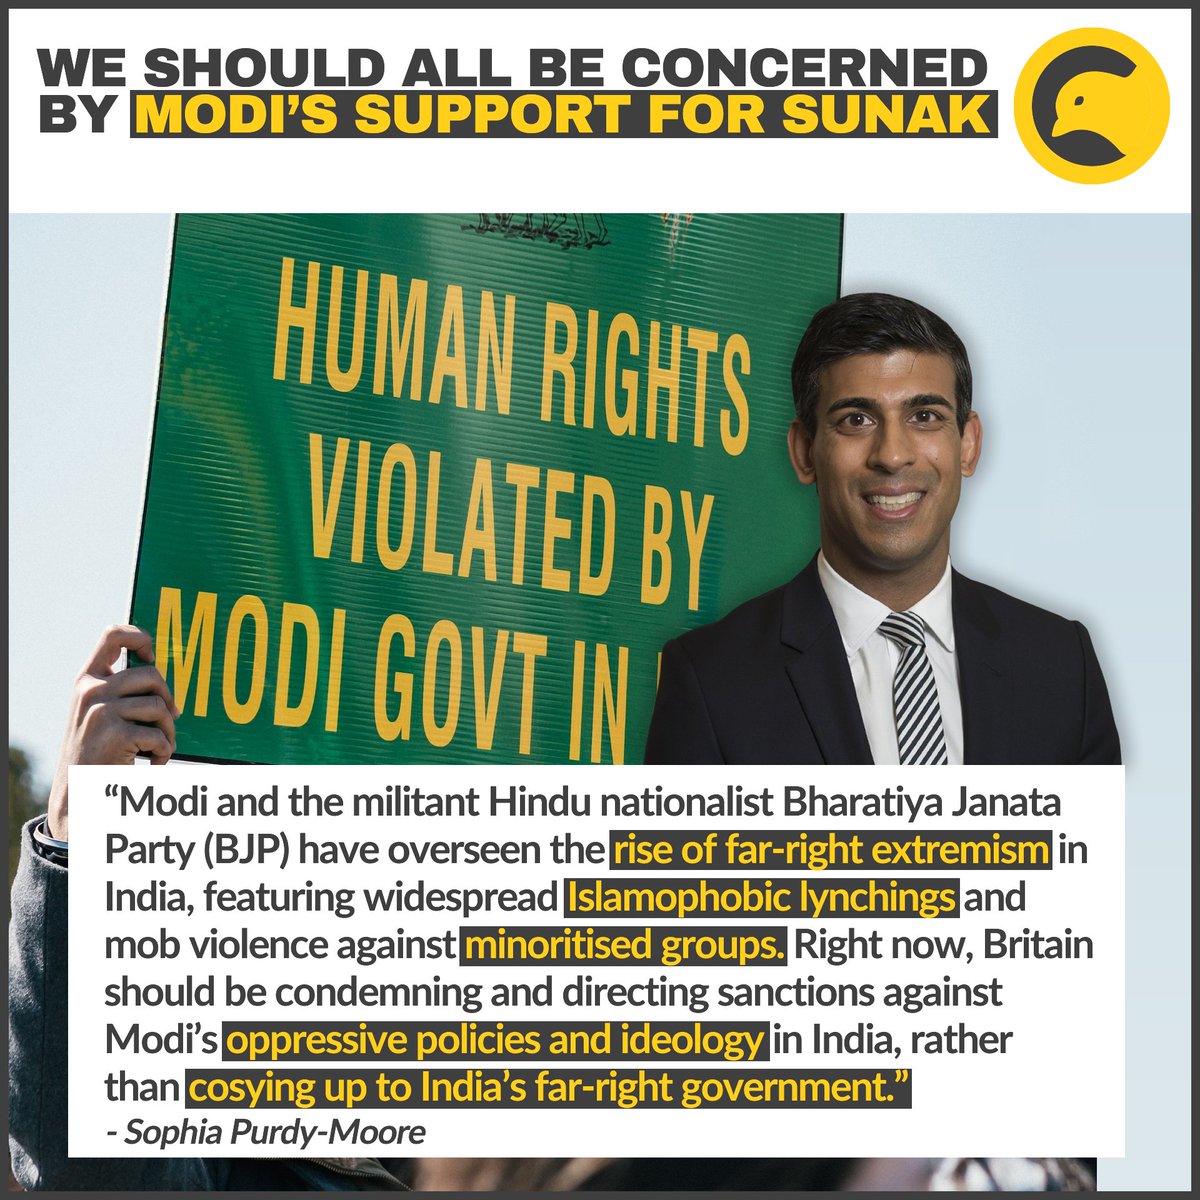 Modi's endorsement shows that the Tories will continue to fan the flames of far right extremism Full article 👇: thecanary.co/trending/2022/… #modi #RishiSunakPM